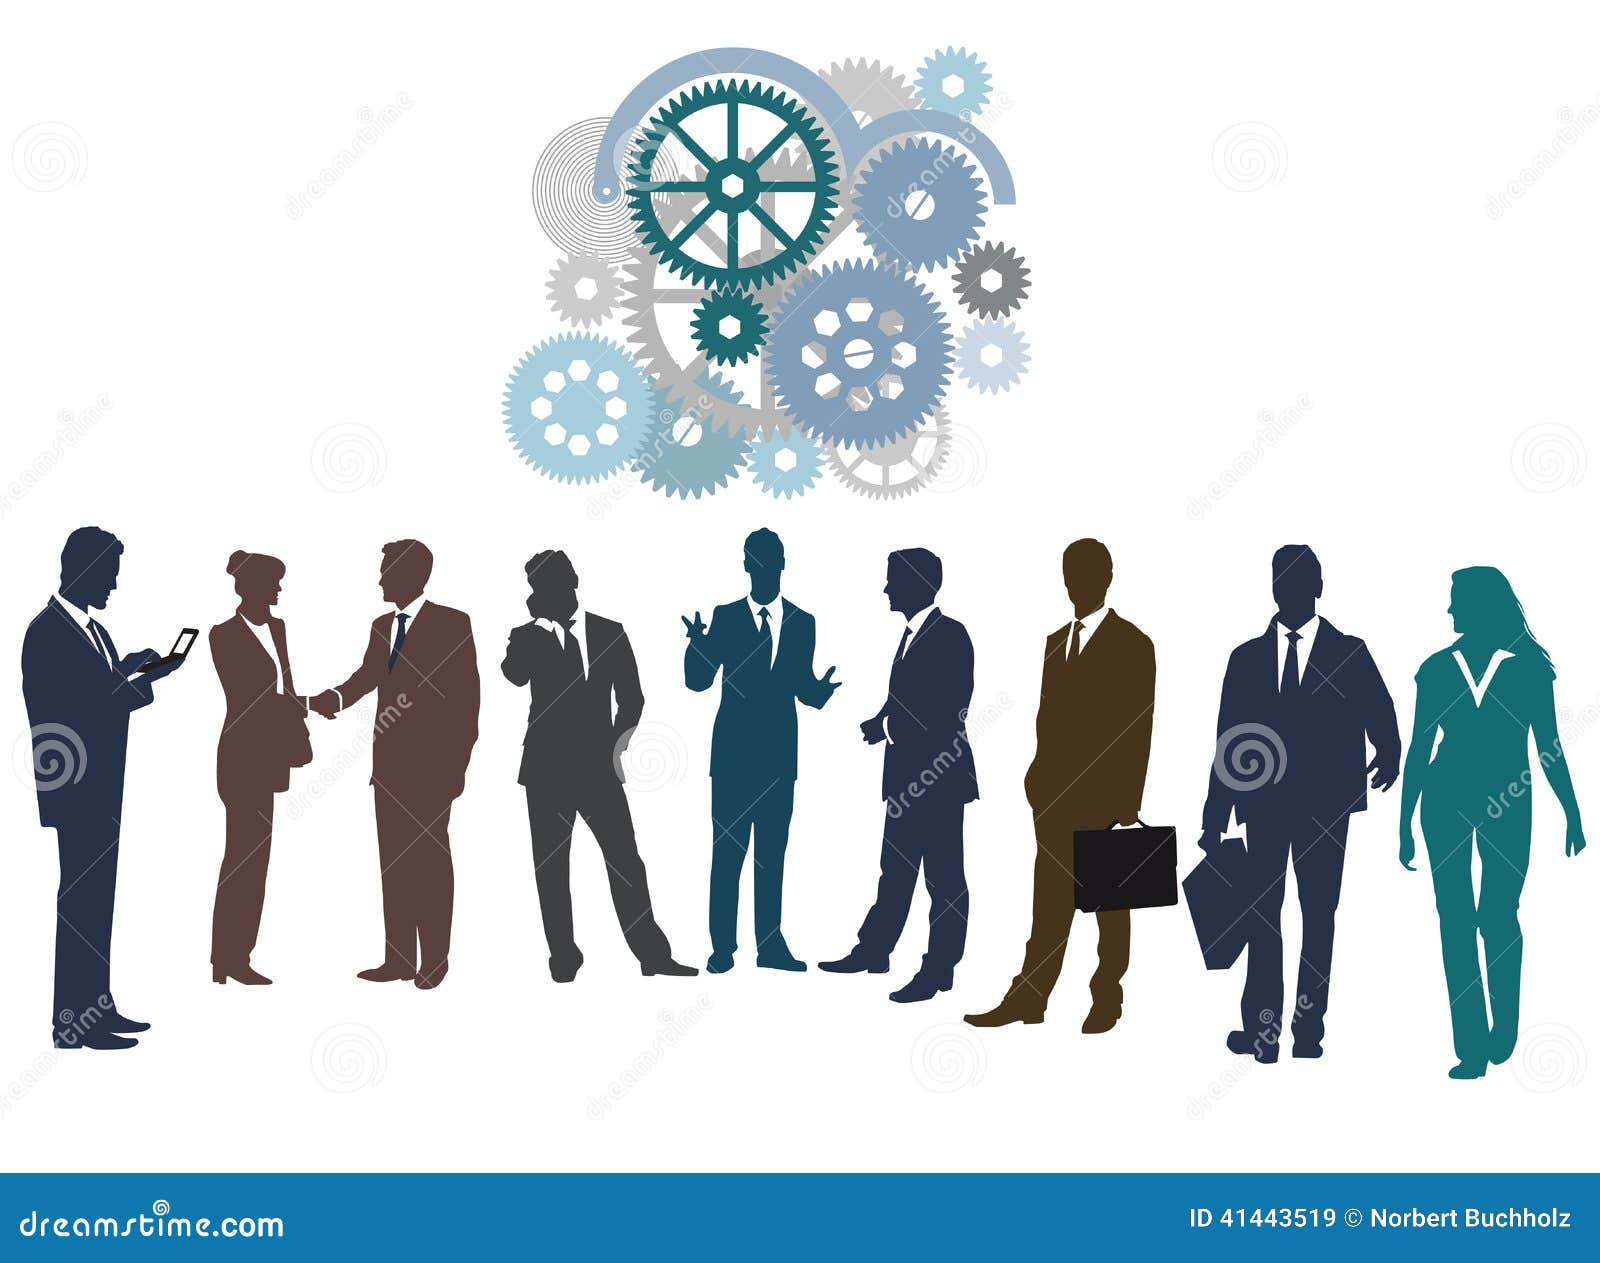 free business networking clipart - photo #19